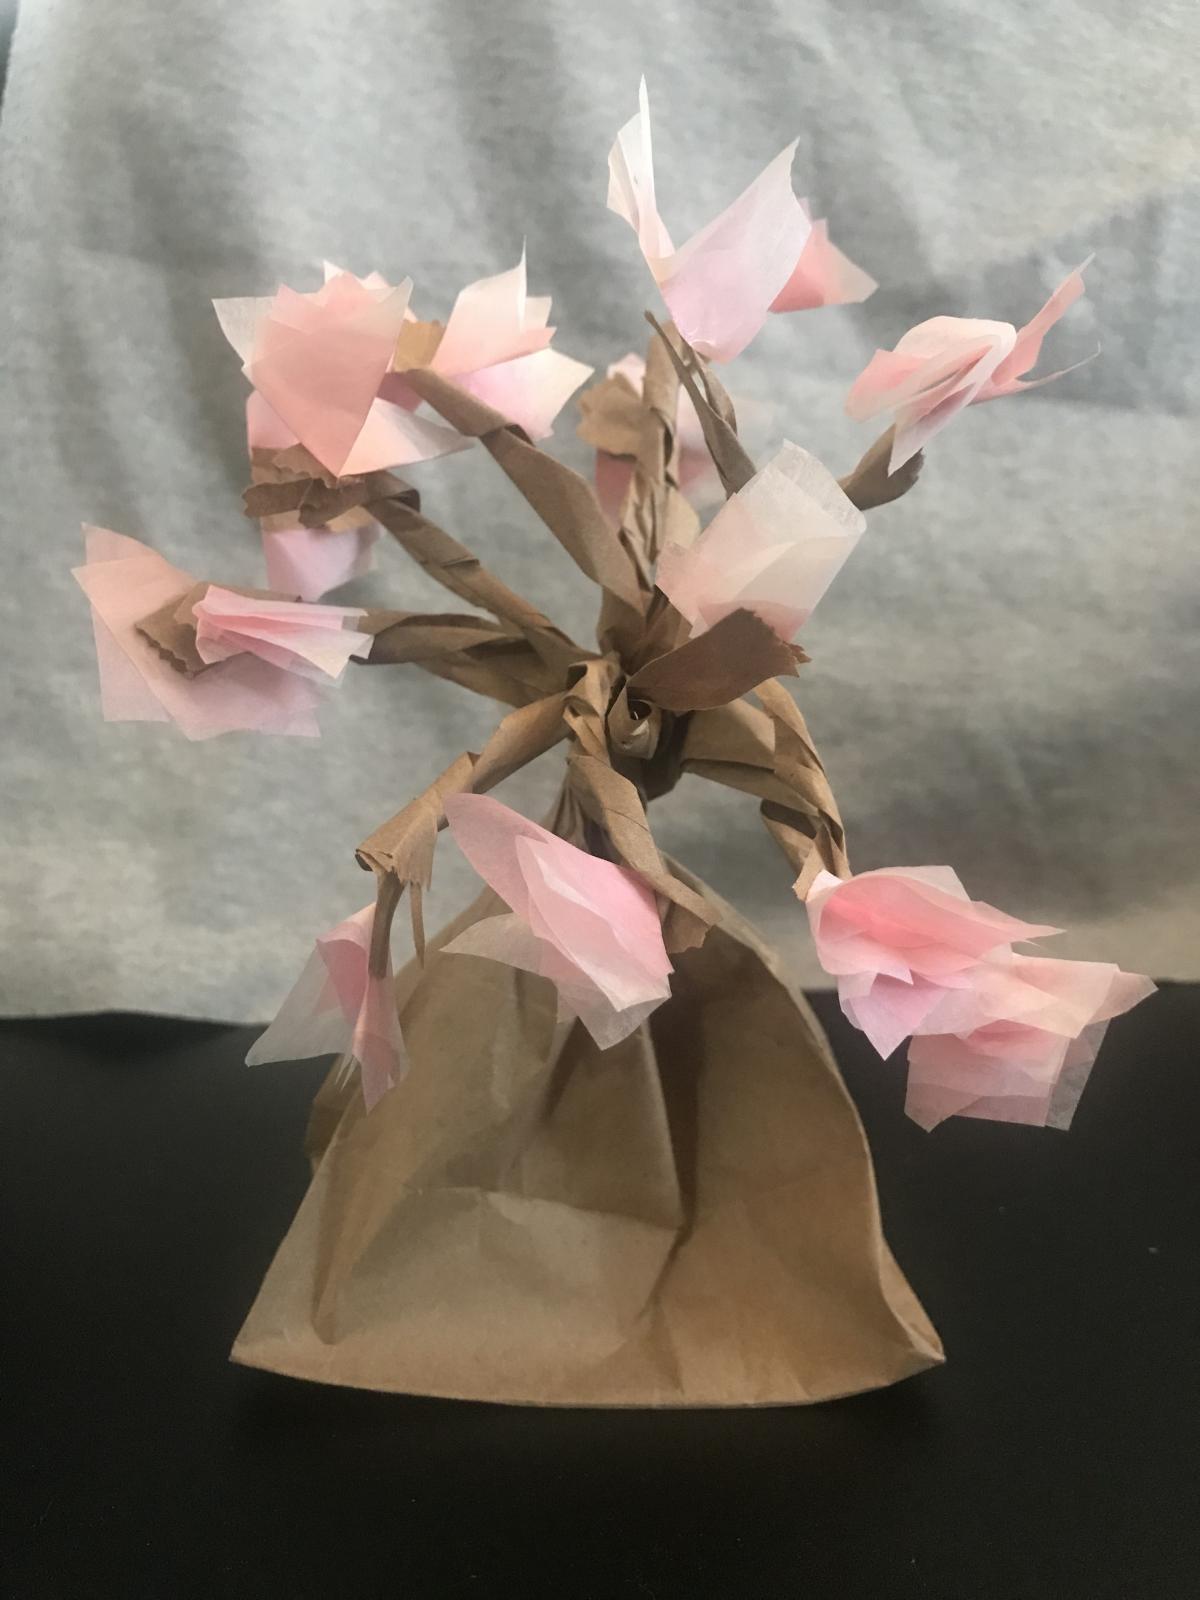 a tree made out of a paper bag